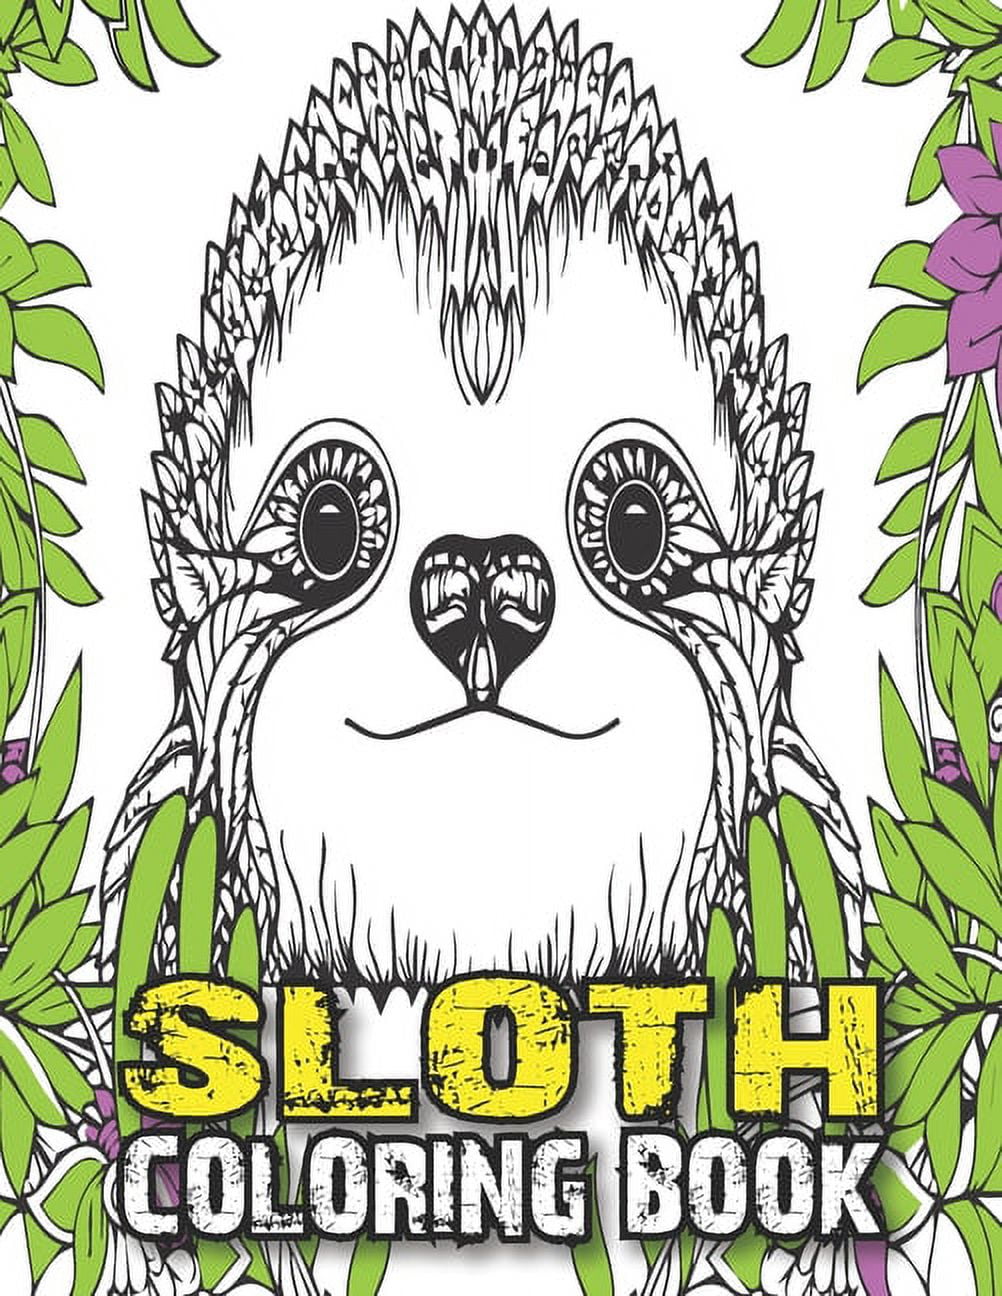 Sloth coloring book a fun sloth animal coloring pages for kids toddlers teen fun cute and stress relieving sloth coloring book baby sloth super sloth adorable sloths funny sloths coloring book large size paperback